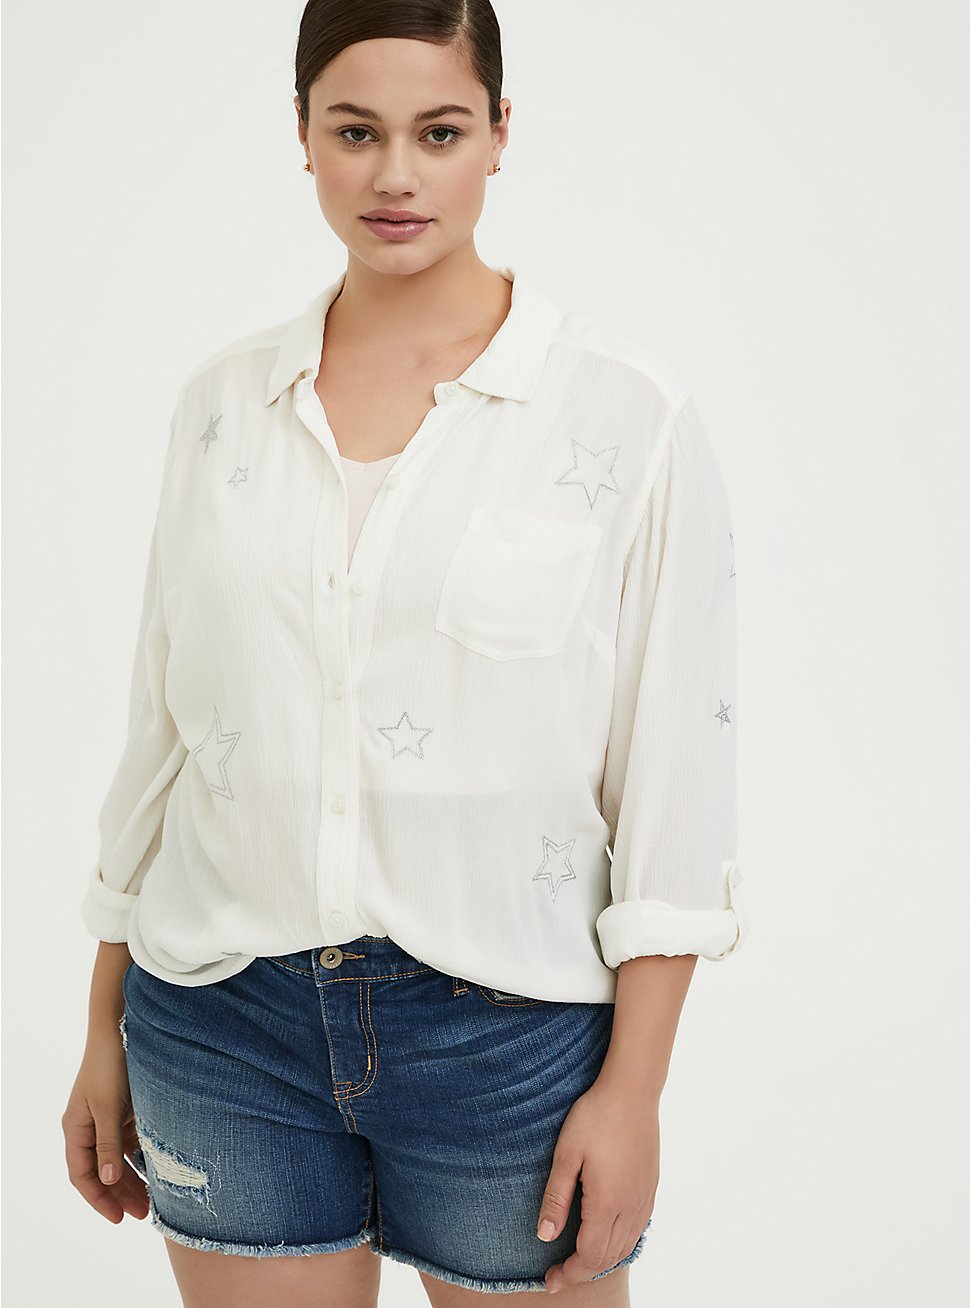 Taylor - White Gauze Embroidered Star Button Front Relaxed Fit Shirt, CLOUD DANCER, hi-res